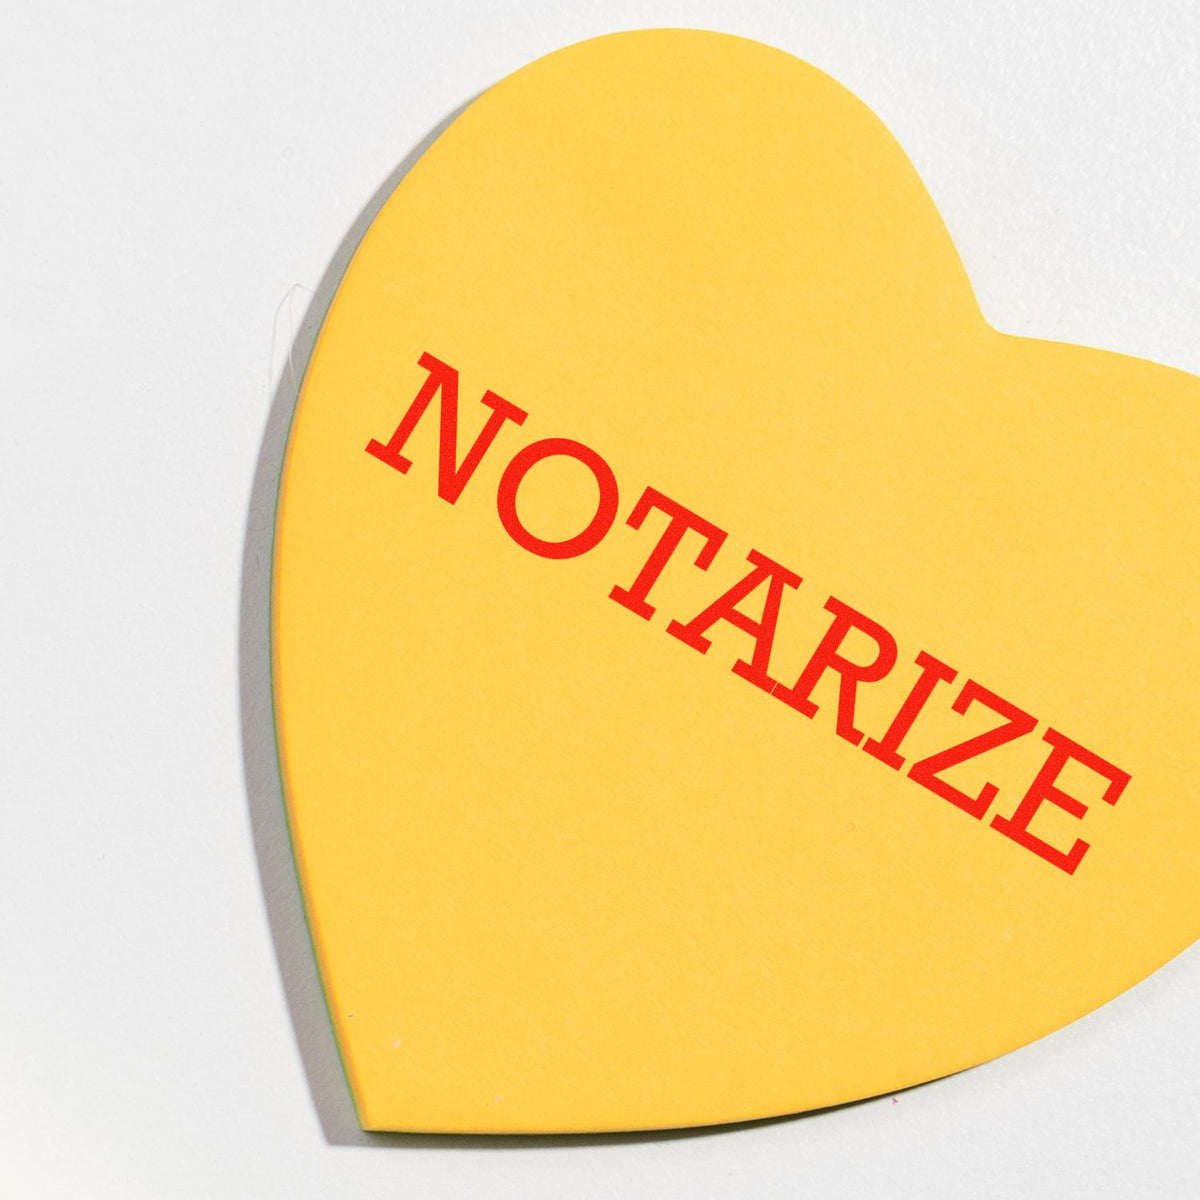 Notarize Rubber Stamp In Use Photo